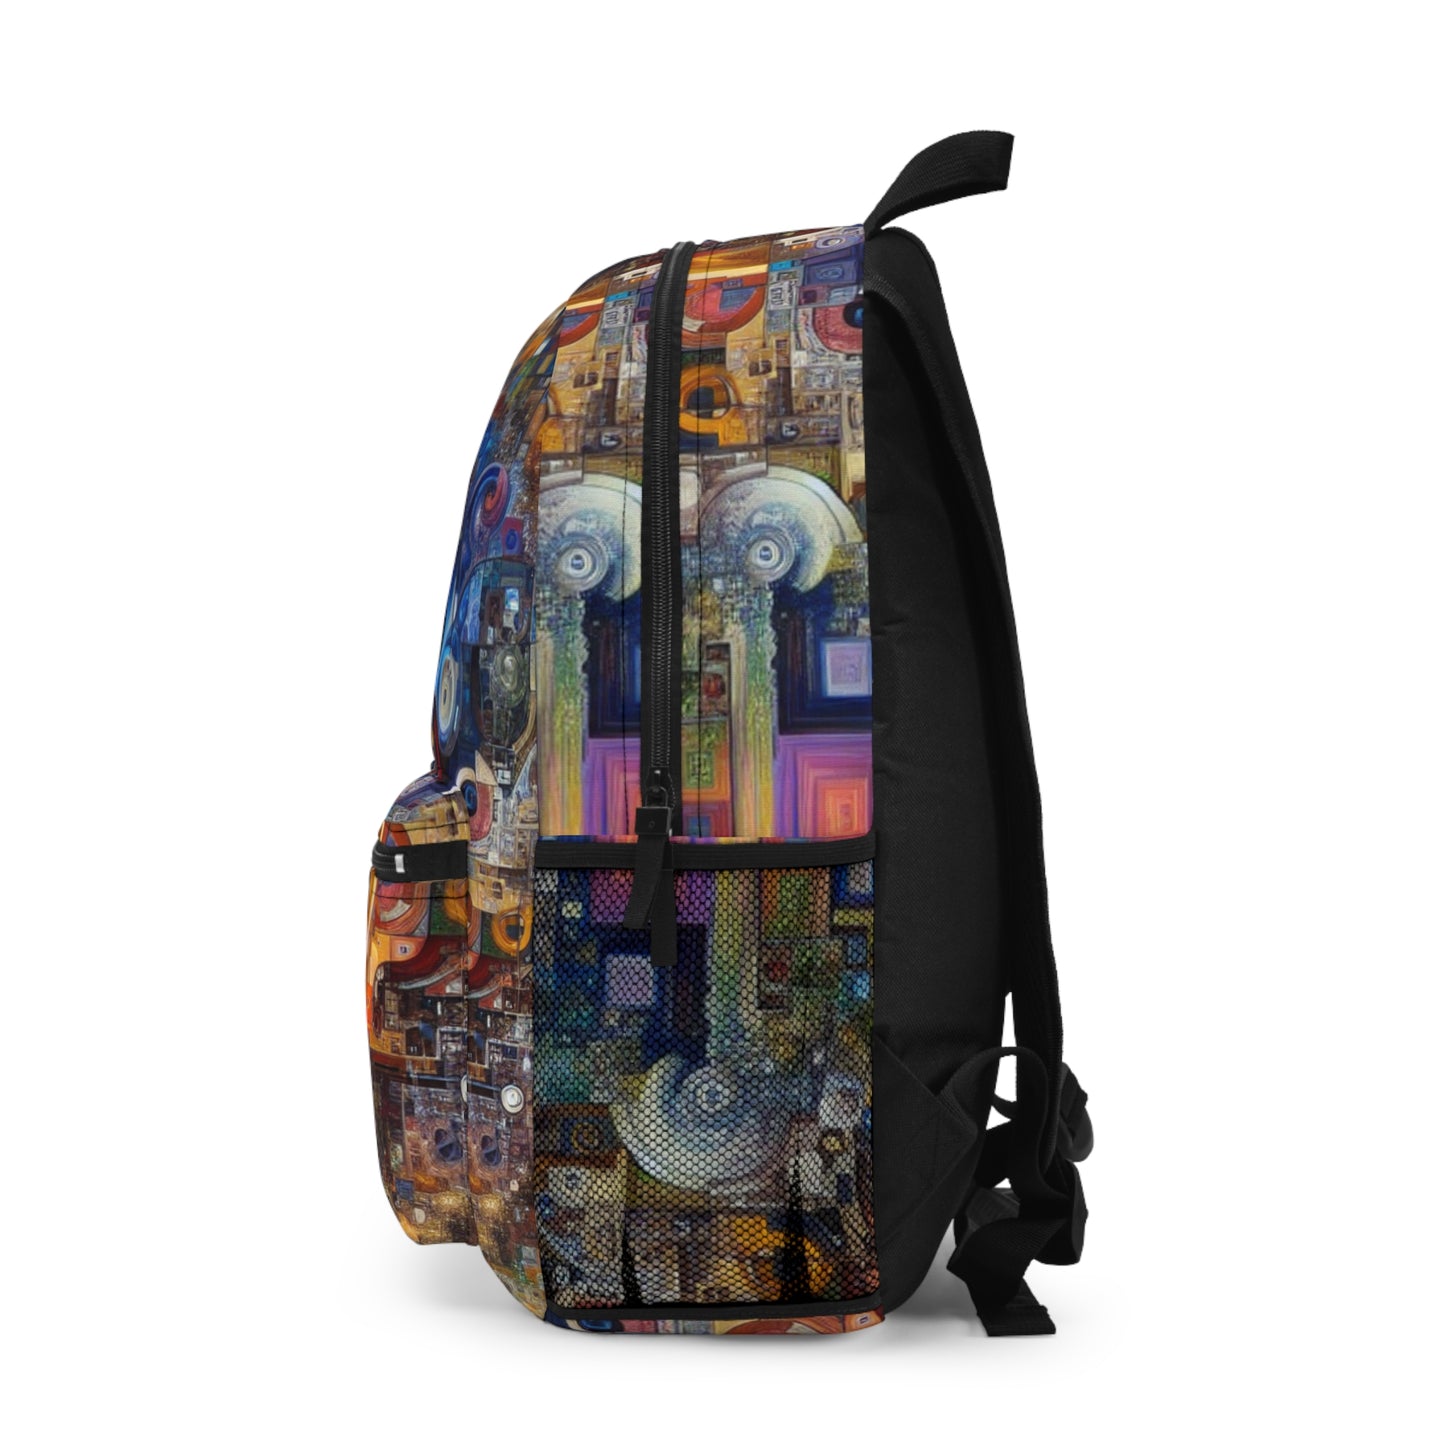 "Perception Distorted: A Postmodern Commentary on Reality" - The Alien Backpack Postmodern Art